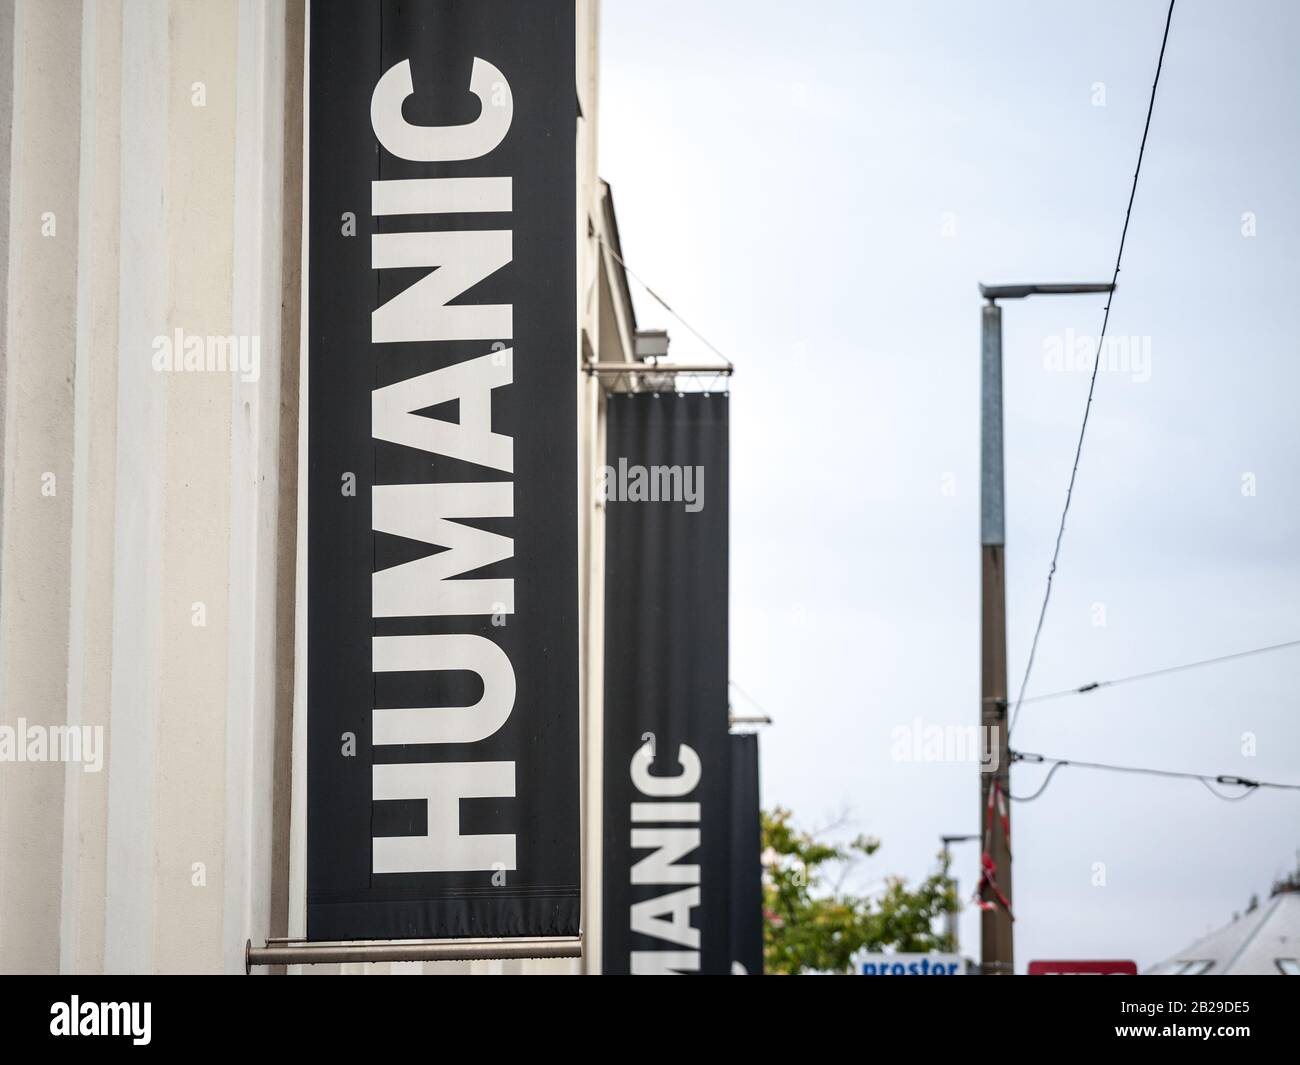 Humanic shoe store hi-res stock photography and images - Alamy